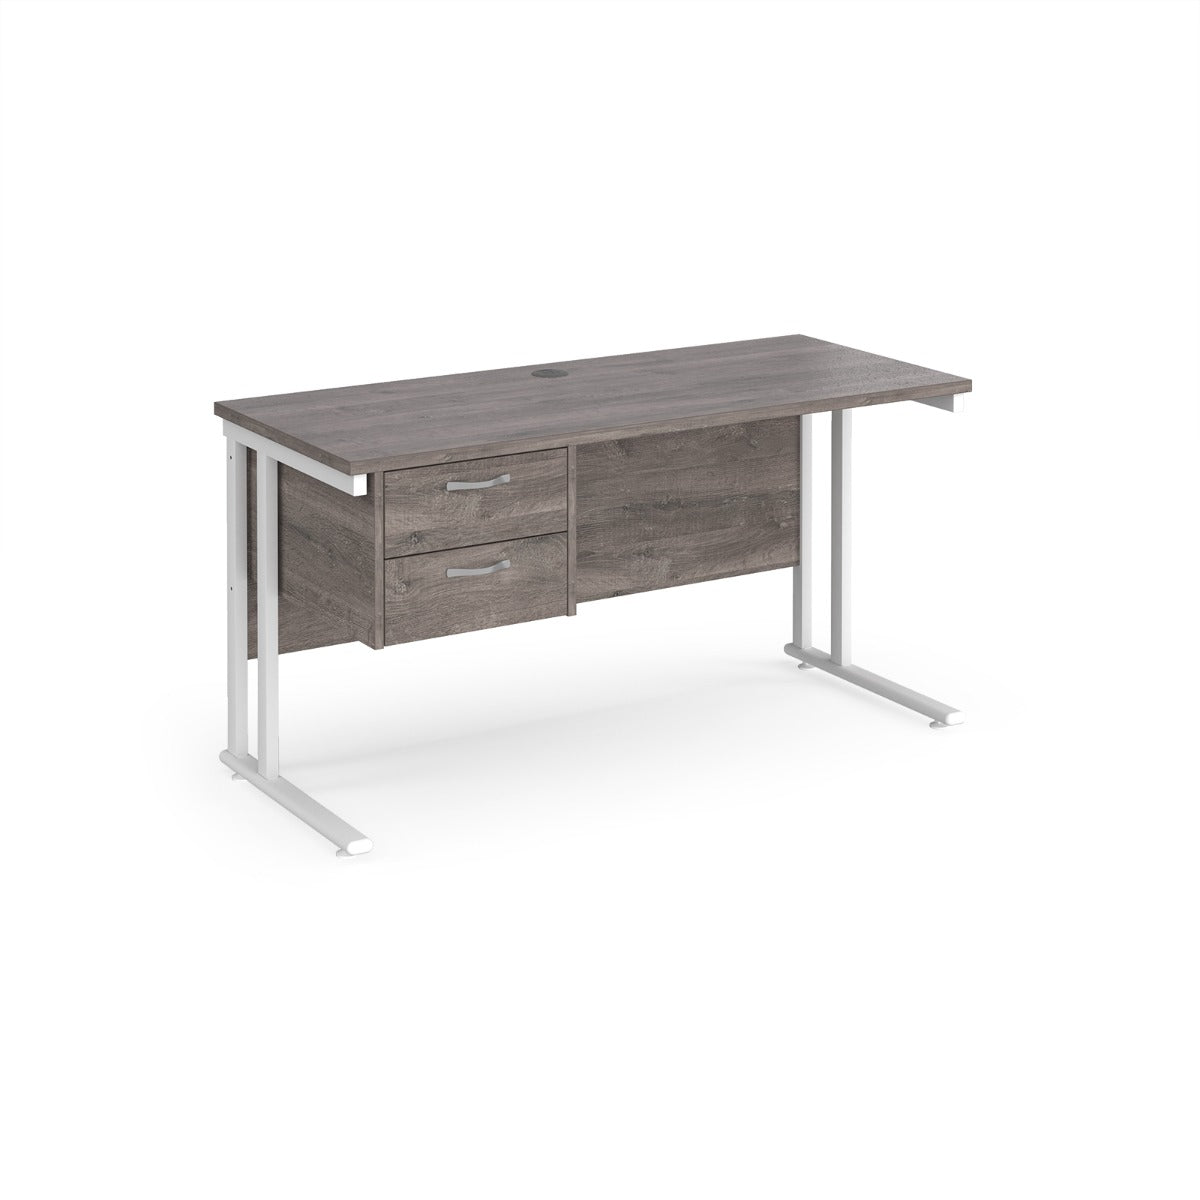 Maestro 600mm Deep Straight Cantilever Leg Office Desk with Two Drawer Pedestal